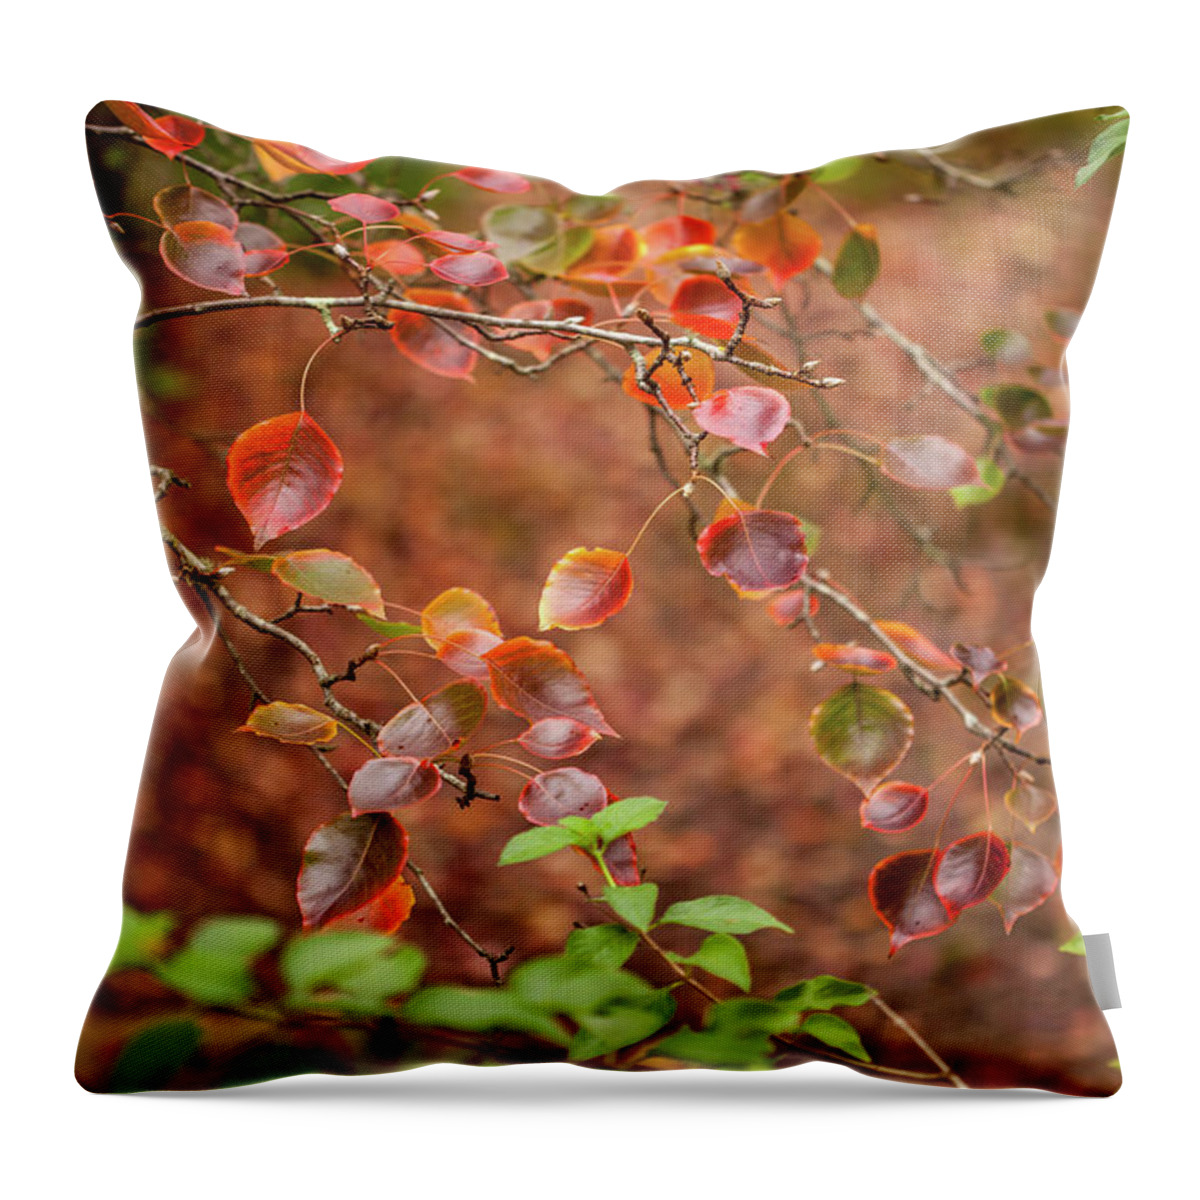 Autumn Leaves Throw Pillow featuring the photograph Prepping For Winter by Az Jackson